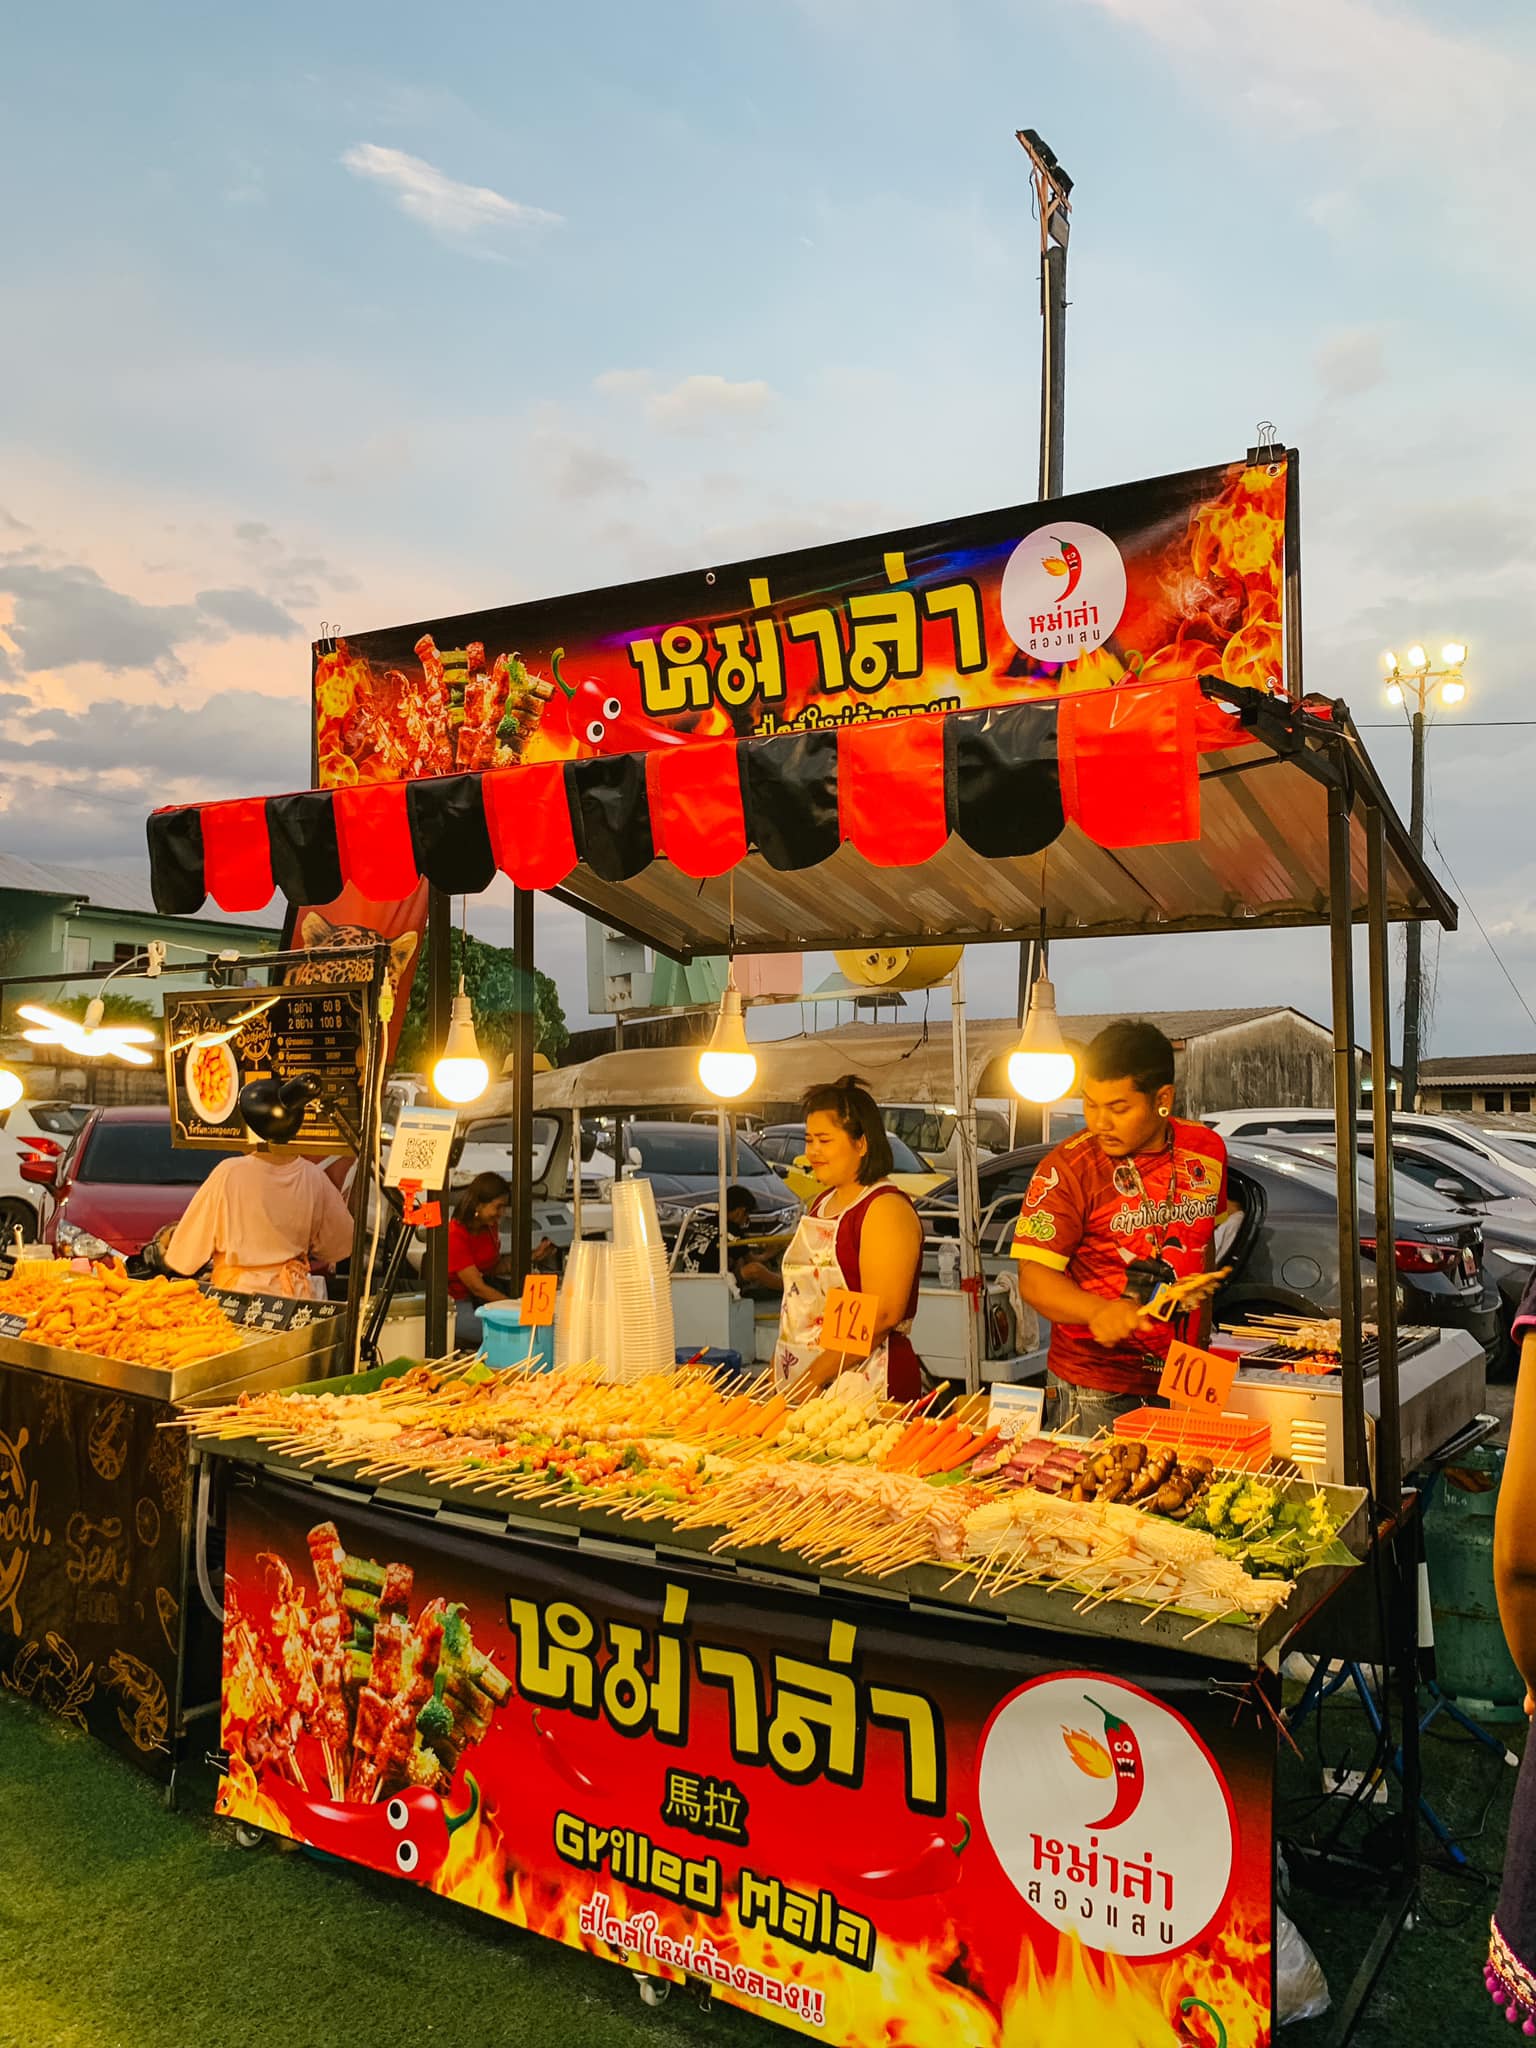 A grilled Mala food cart selling delicious and spicy meats inside Chillva Market in Southern Thailand.